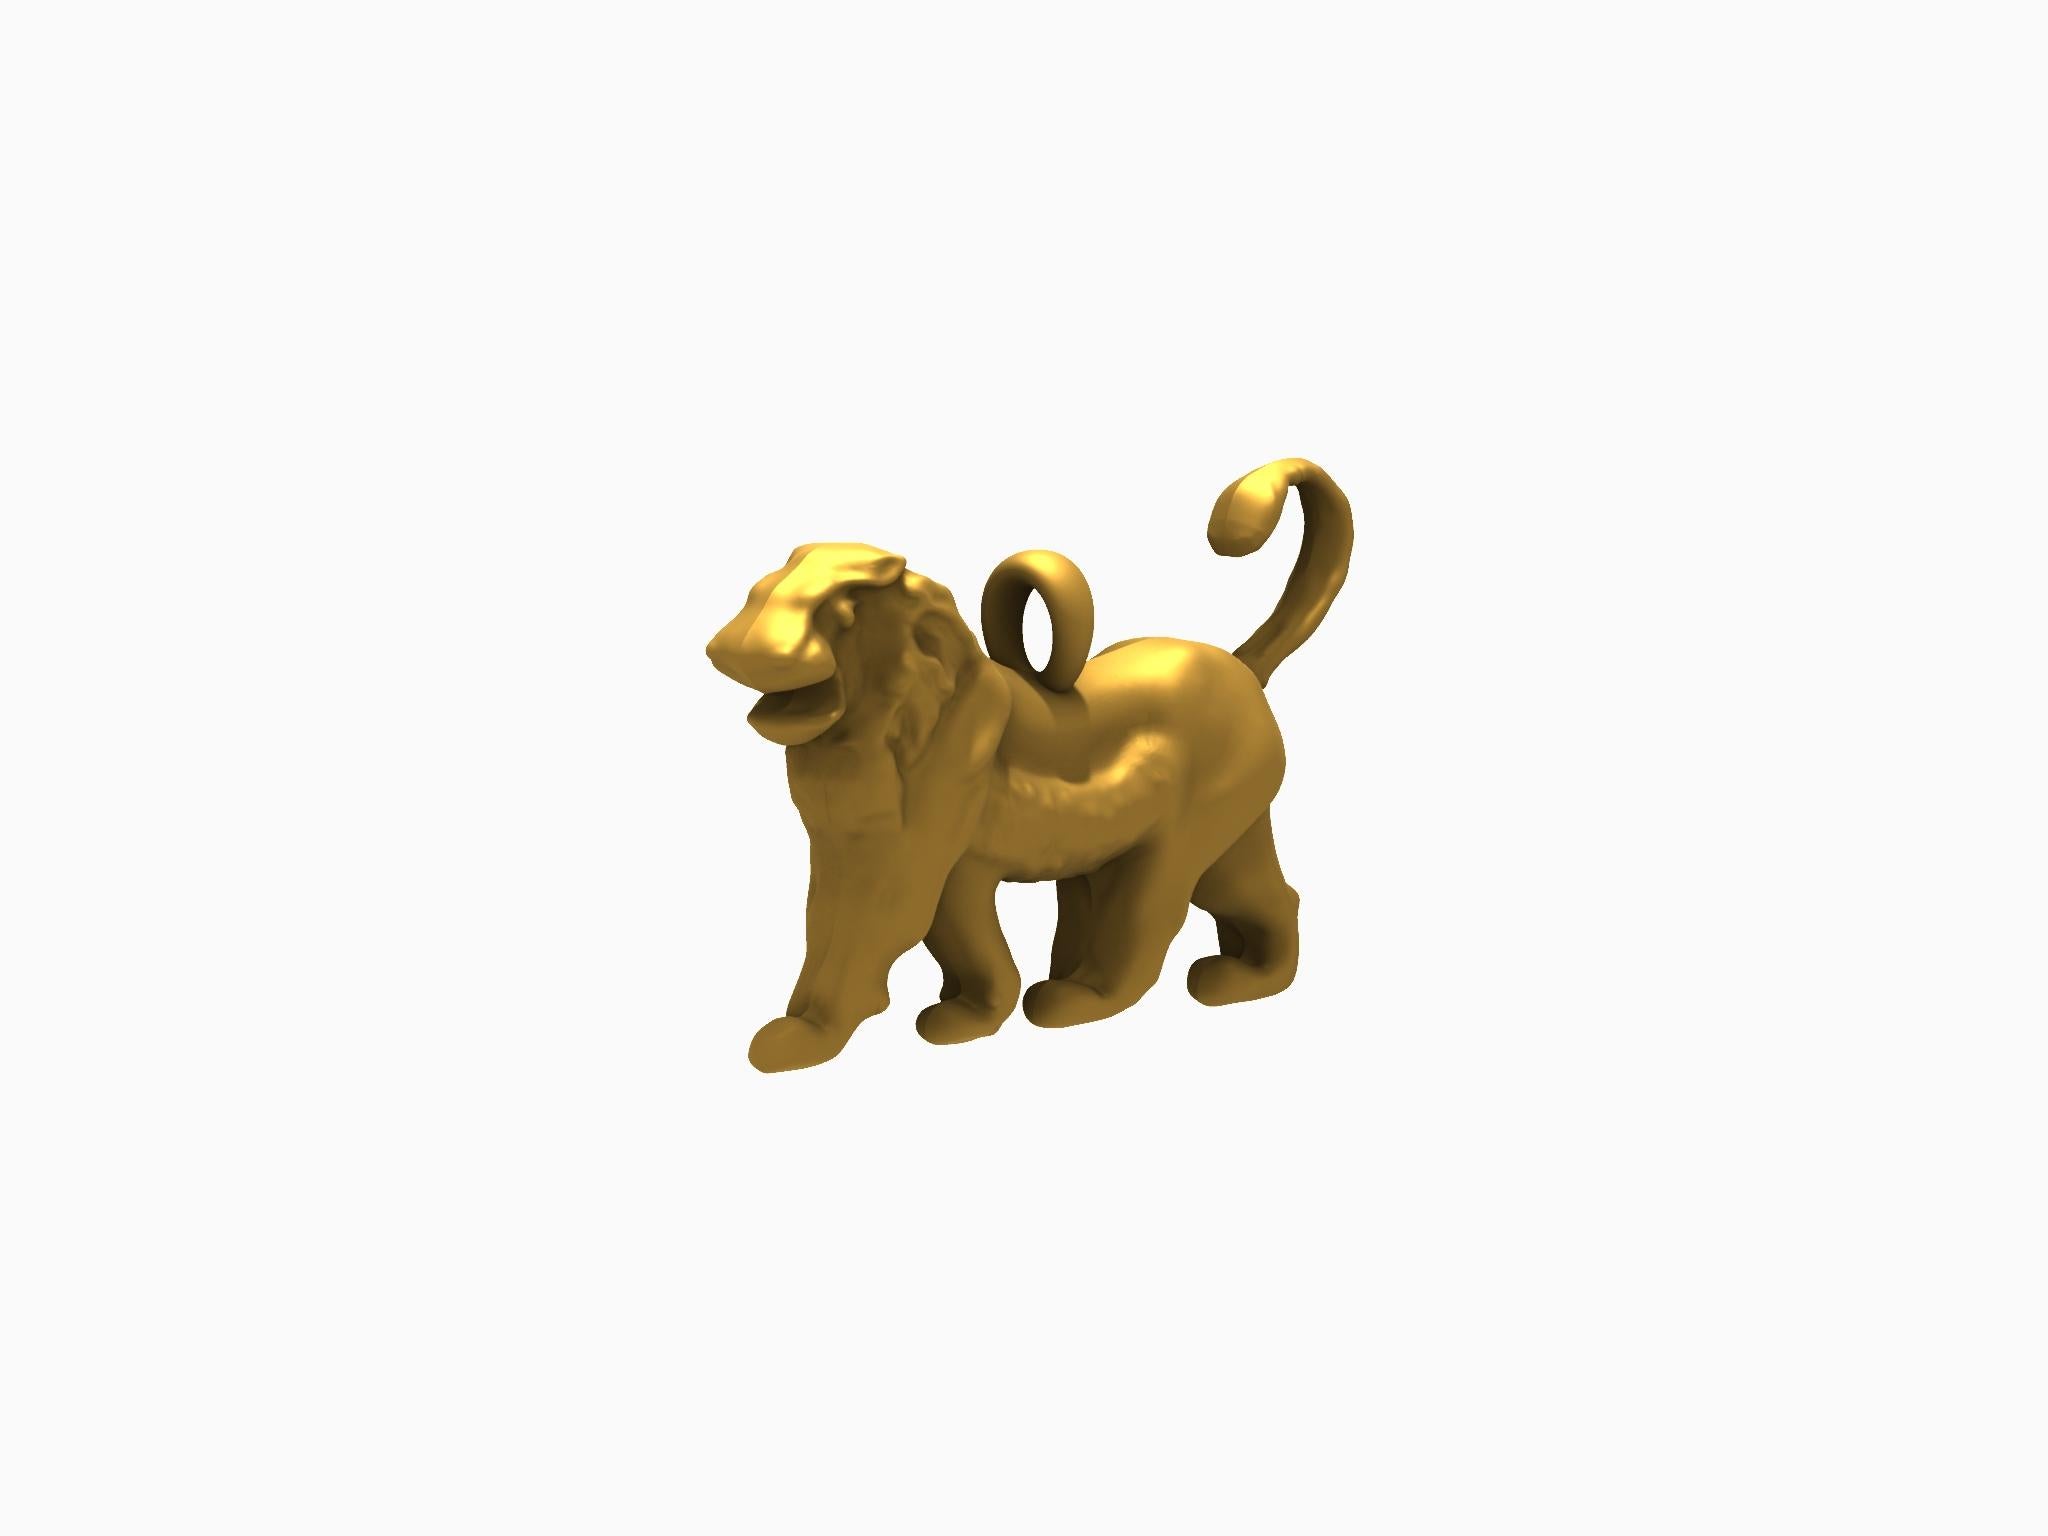 Tiffany Designer , Thomas Kurilla  created this exclusively for 1stdibs. 18 karat Yellow Gold double sided Persepolis Lion Pendant Necklace ,1 inch wide .I am a sculptor turned jewelry designer. This lion  has been the most fun in a while to sculpt.